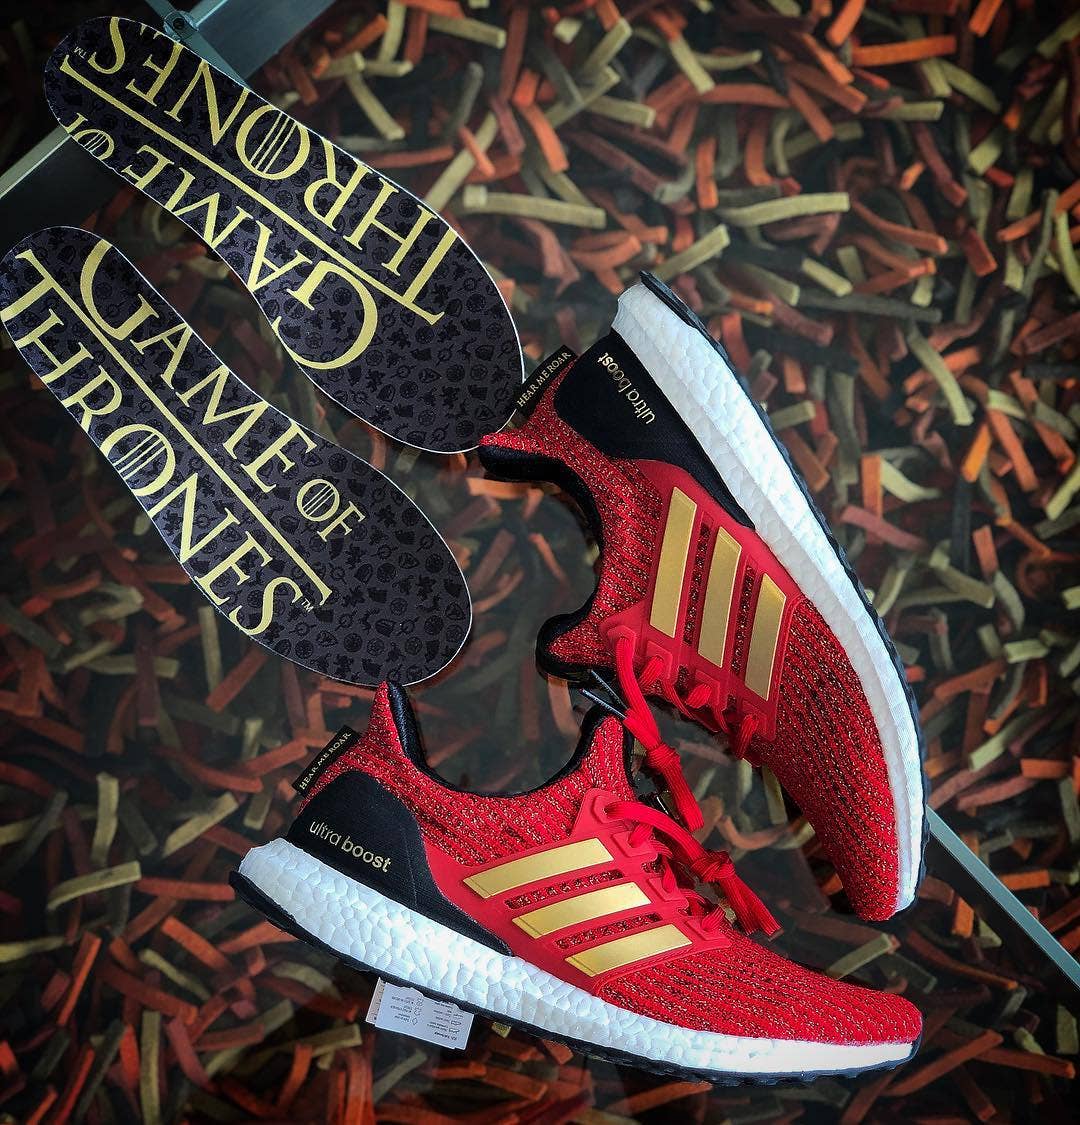 Game of Thrones x Adidas Ultra boost Lannister Release Date